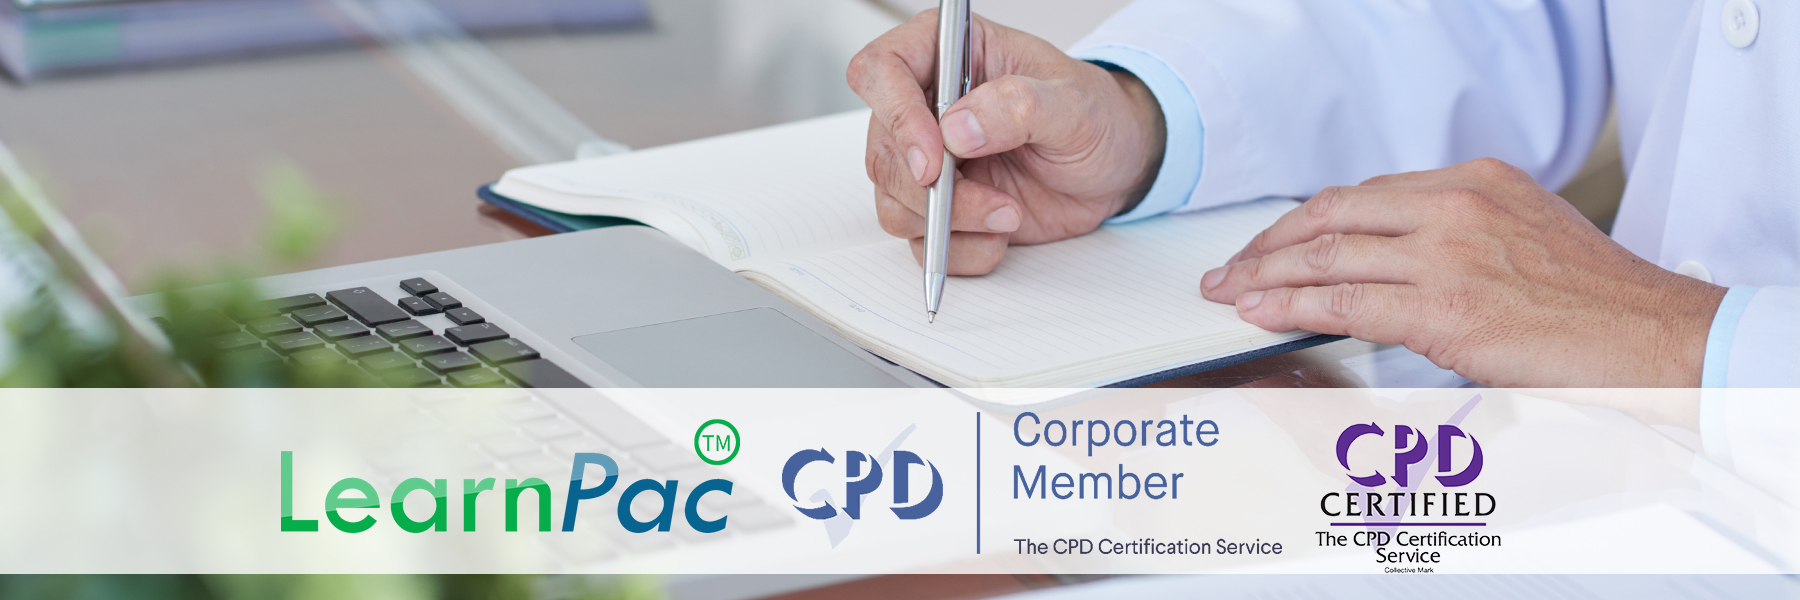 with Certificates - CPDUK Accredited